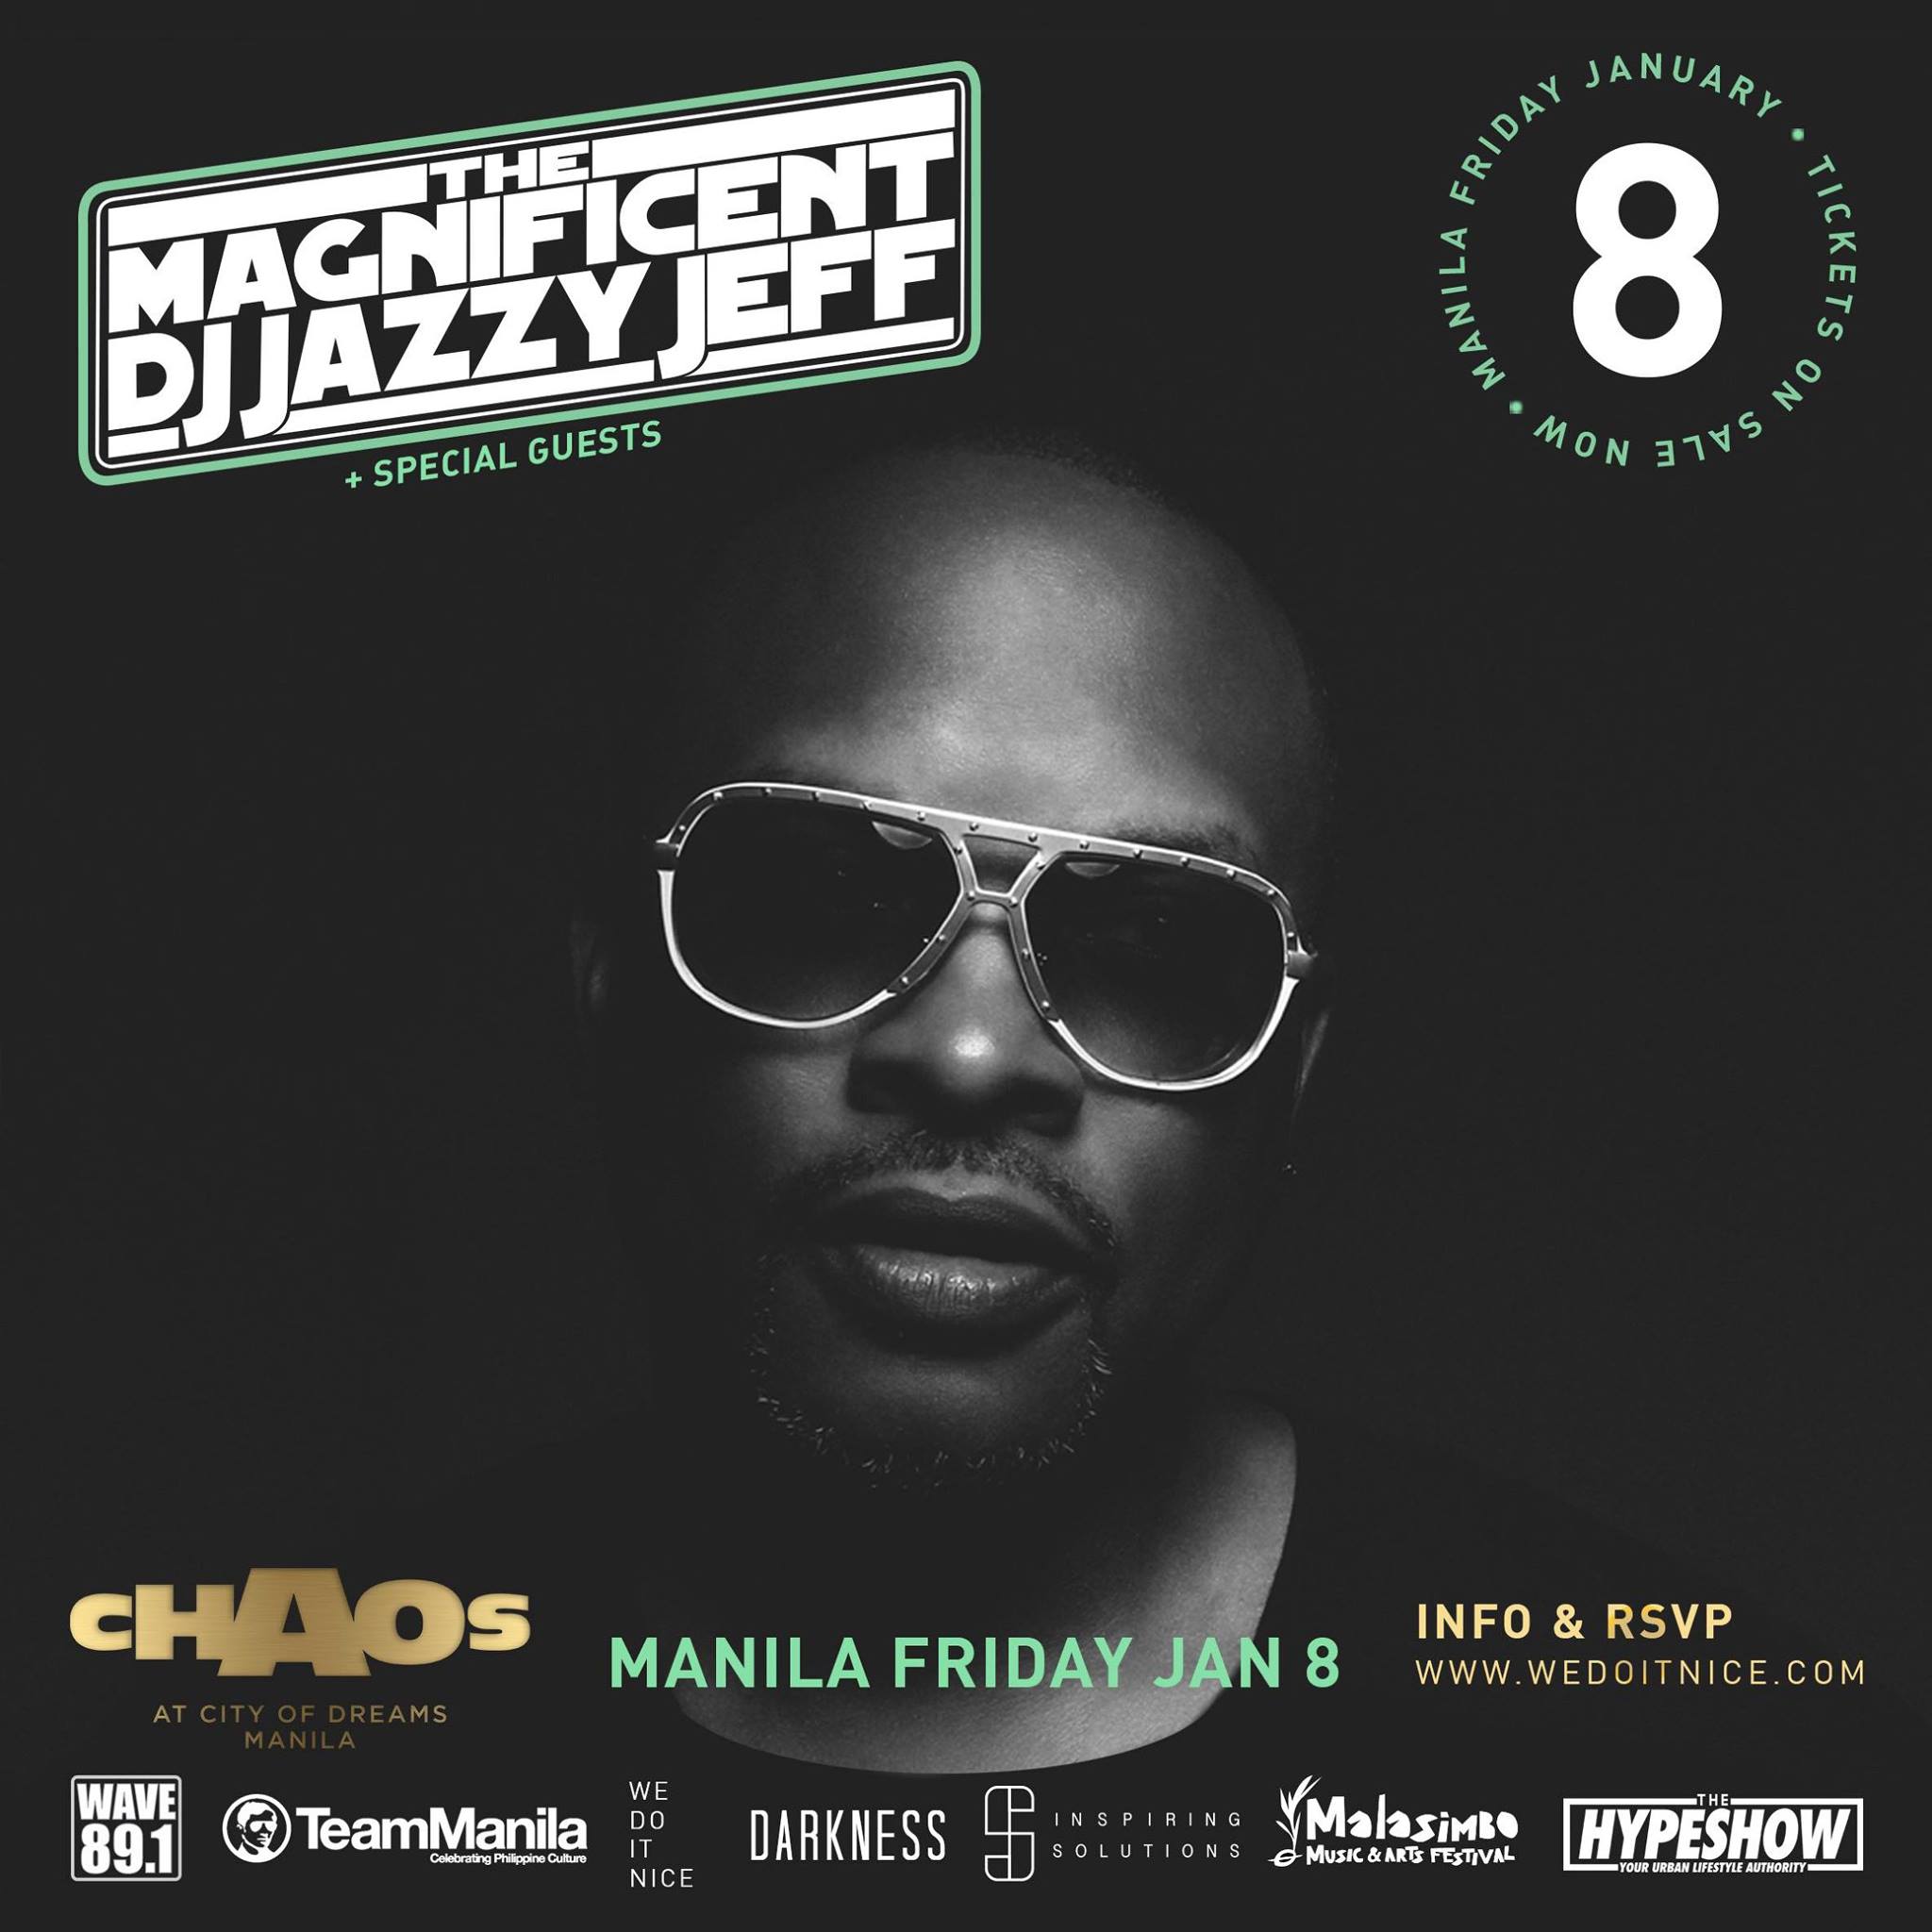 DJ JAZZY JEFF + Special Guests - Manila clock Friday, January 8, 2016 at 10 PM Tomorrow ticket Find Tickets Tickets Available www.wedoitnice.com Once again back it’s the incredible! From the team that brought you the ground breaking Breathe & Stop, Laced Up tours feat. Iconic legendary music artists. Heavy Boogie & We Do It Nice together with Inspiring Solutions & The Darkness Crew are proud to present live. DJ JAZZY JEFF + Special Guests Friday 8th January CHAOS at City Of Dreams Manila + DJs DJ Teaze & DJ Jena Nix Pernia Complex & Kristian Hernandez Visuals by Scratchmedia Visuals RSVP & register at: www.wedoitnice.com #wedoitnice ========================================== TICKET INFORMATION - AVAILABLE NOW ! ========================================== DONT BE LAZY ! - BUY NOW & GET A HUGE SAVING UP TO 50 % OFF ! Getting down & dancing to Jazzy Jeff, the best New Year treat ! P 800 - EARLY BIRD AVAILABLE NOW ONLY 100 AVAILABLE SAVE 50 % (800 OFF) WHILE STOCK LAST P 1200 - ADVANCE ONLY 200 AVAILABLE 12.17.15 SAVE 25 % (400 OFF) WHILE STOCK LAST P 1600 - AT THE DOOR ONLY 200 AVAILABLE 1.8.16 INCLUDES 1 DRINK VIP & TABLES CALL, EMAIL +63 917 886 3678 CHAOSTABLERESERVATIONS@COD-MANILA.COM ========================================== TICKET LOCATIONS ========================================== Google Map Locations https://goo.gl/InX2Zv MAKATI MUSEUM CAFE A SPACE 110 Lagazpi St TEAM MANILA Powerplant Mall. Rockwell TEAM MANILA Gloretta 3 TEAM MANILA Suez & Zapote. San Antonio Village J&S SURF Guijo St. San Antonio Village FRANGOS 9595 Kamagong St. San Antonio BACKALLY Bautista St. Salcedo village TIME CLUB 7840 Makati Ave FORT BGC ROCKET ROOM Bonifacio High St. & 9th Ave. ORTIGAS WAVE 89.1 Emerald Ave. Ortigas Center CHELSEA SM Megamall QUEZON CITY TEAM MANILA Trinoma Mall PASAY CHAOS City Of Dreams Roxas Blvd. ========================================== ABOUT DJ JAZZY JEFF www.djjazzyjeff.com =======